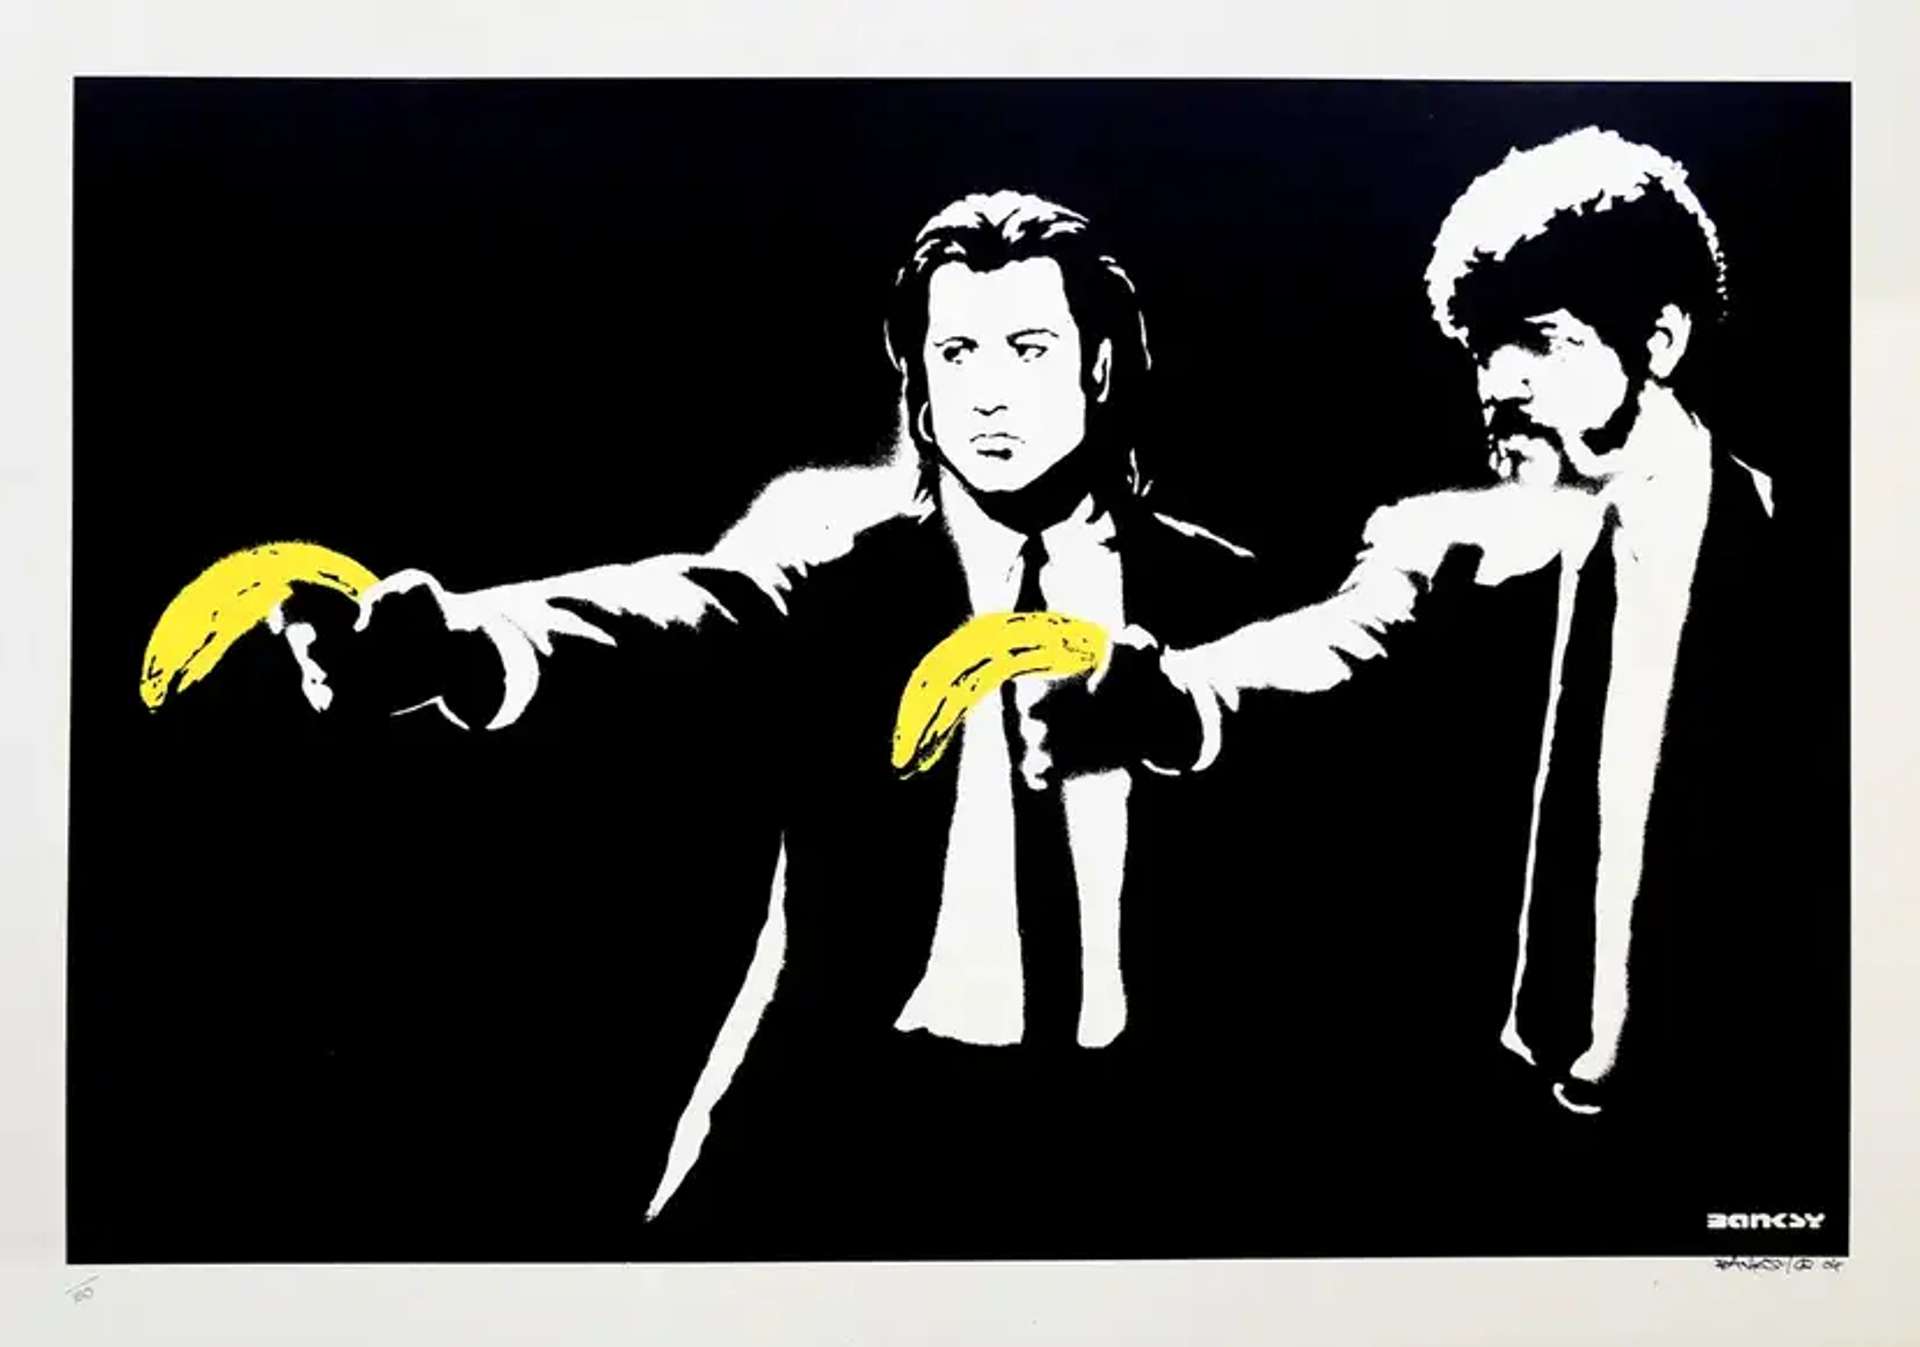 An image of the print Pulp Fiction by Banksy. It depicts a still from the movie Pulp Fiction by Quentin Tarantino where John Travolta and Samuel L. Jackson, dressed in suits and ties, point a gun. In the print, which is done in monochrome, they hold bananas instead. The bananas are the only colourful part of the print.